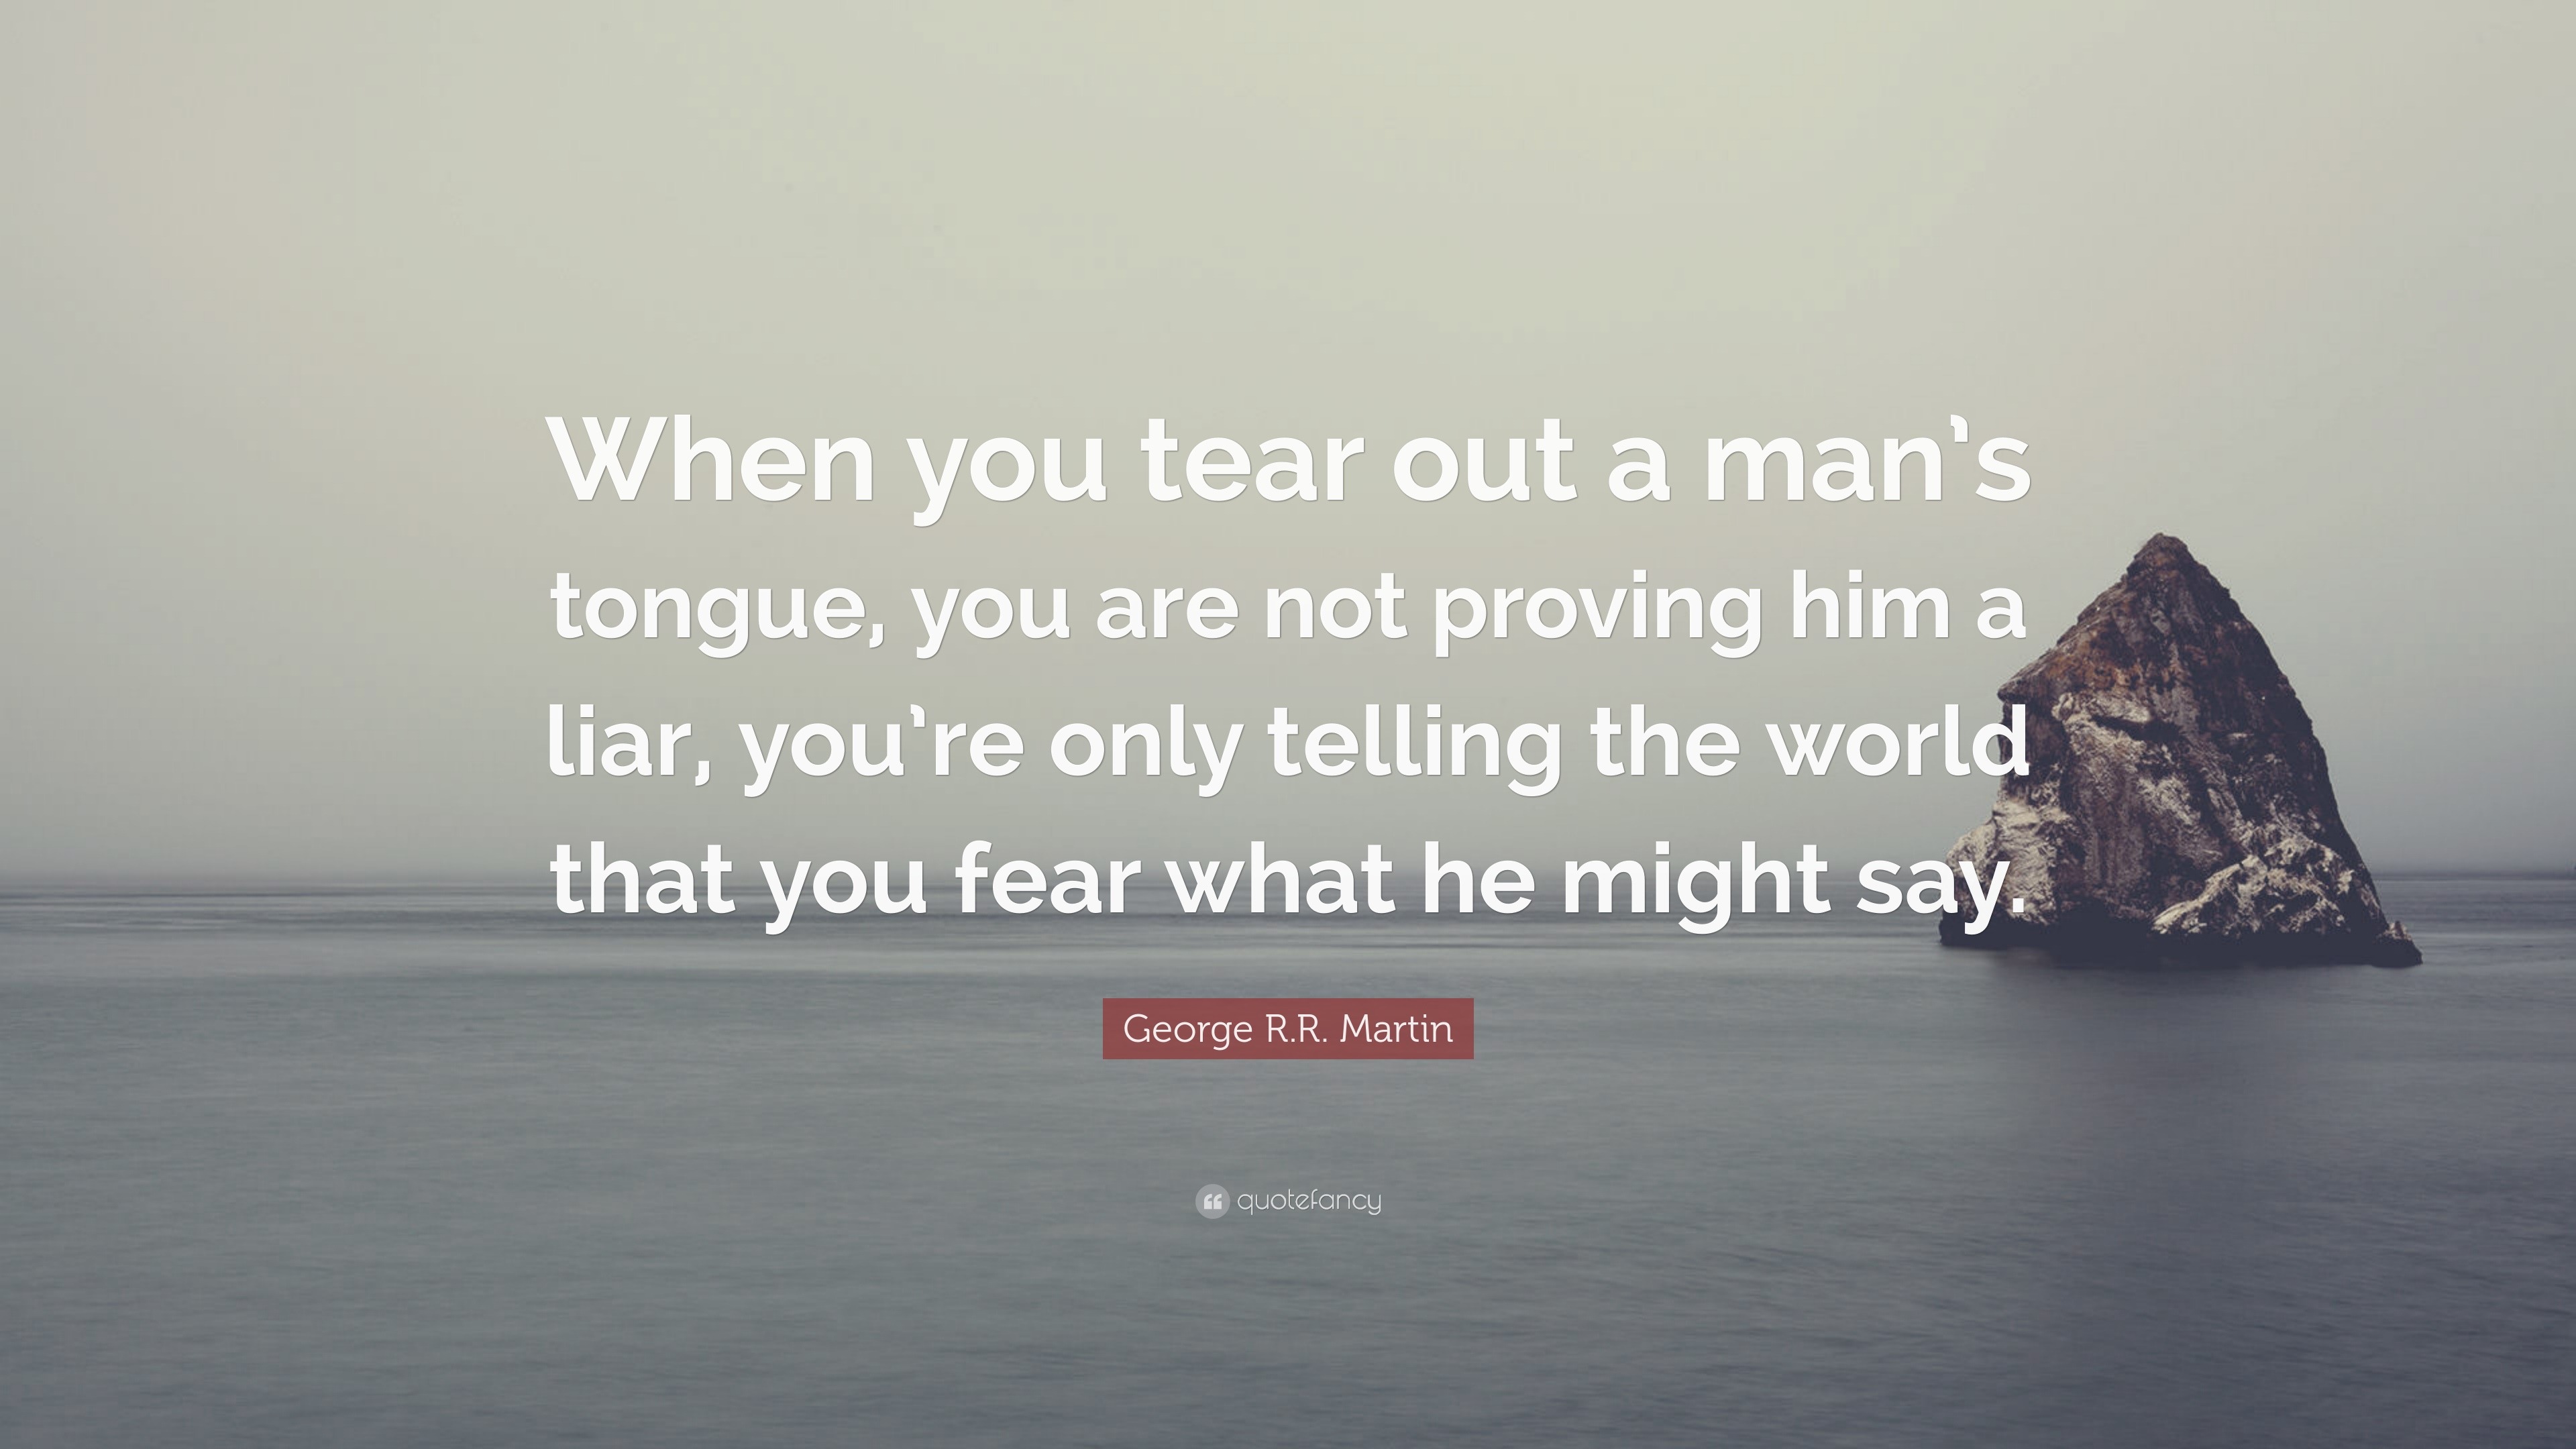 1824456-George-R-R-Martin-Quote-When-you-tear-out-a-man-s-tongue-you-are.jpg